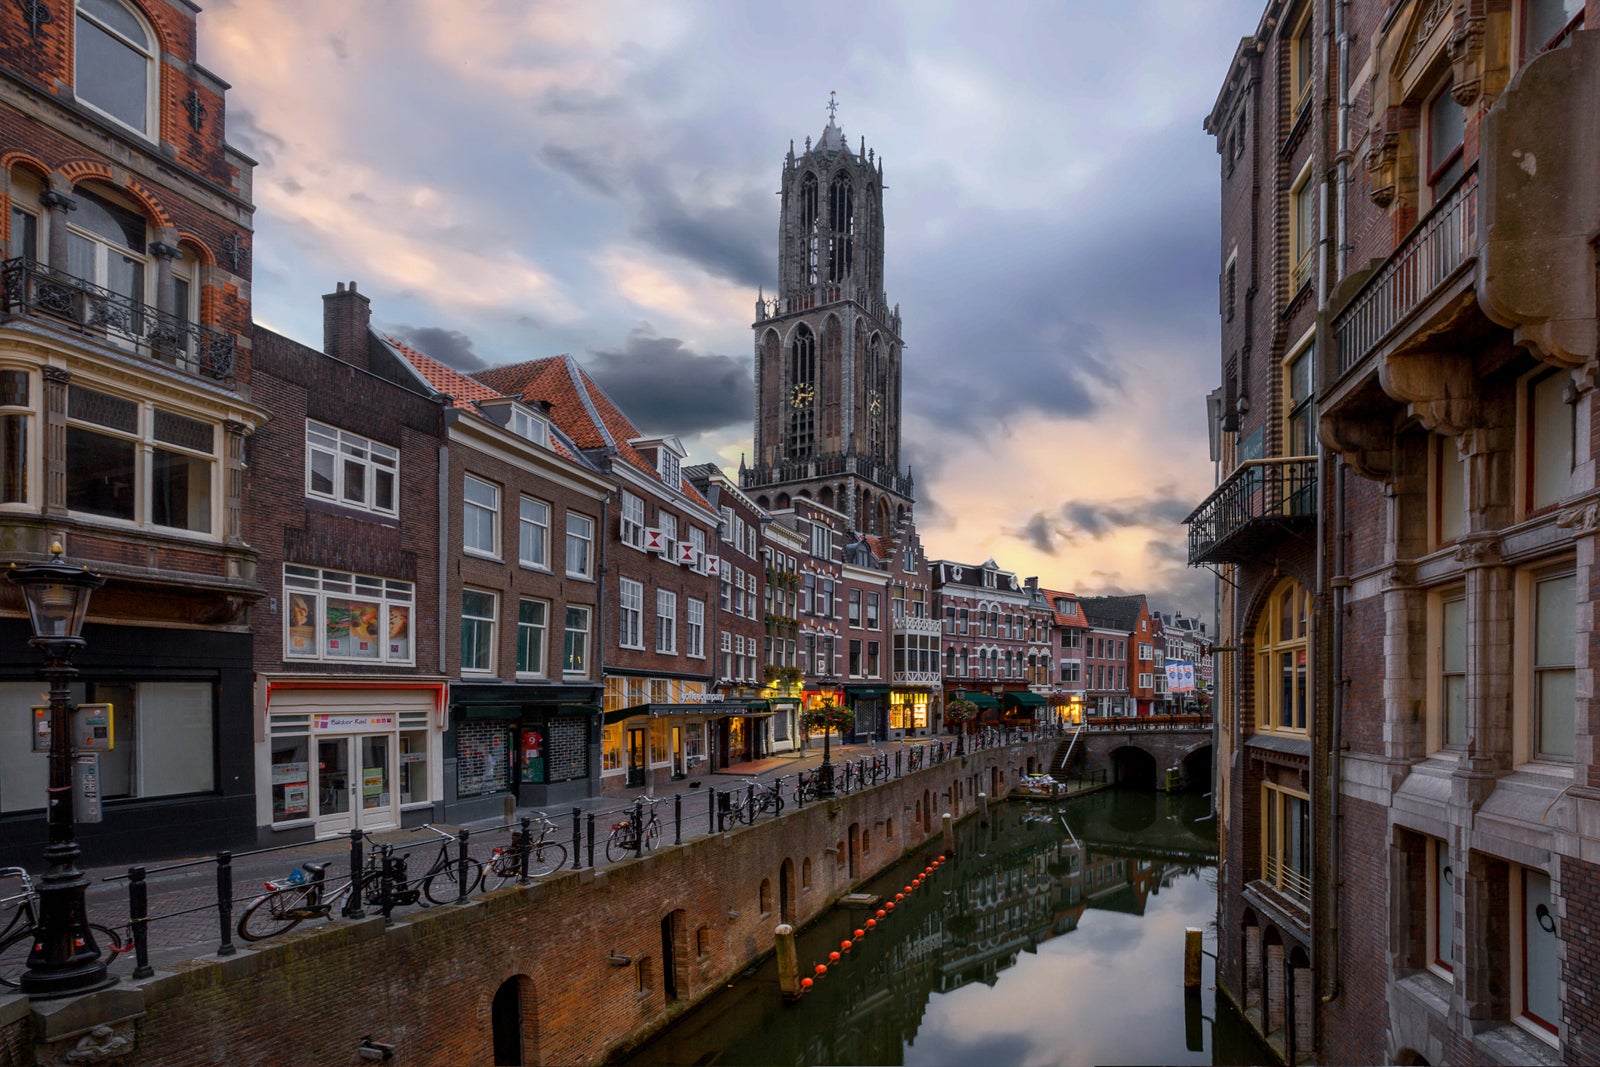 The Dom Tower of Utrecht.